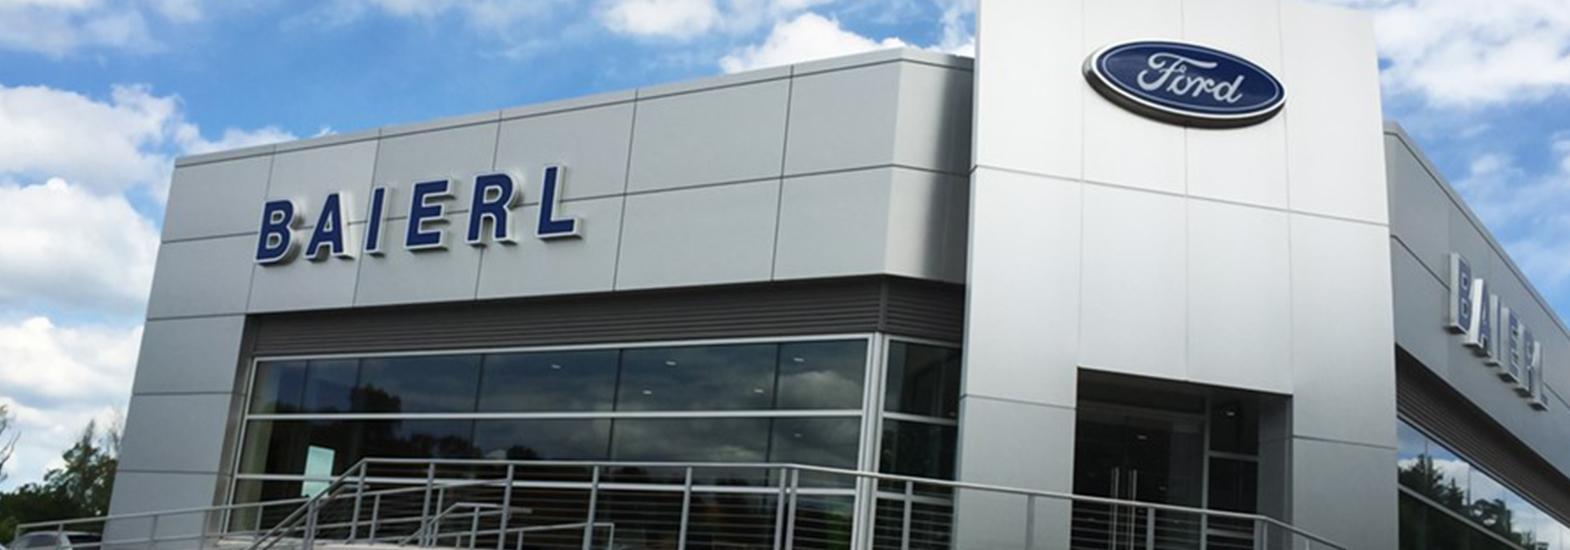 Baierl Ford Improves Employee Satisfaction with Ford SMARTT Program